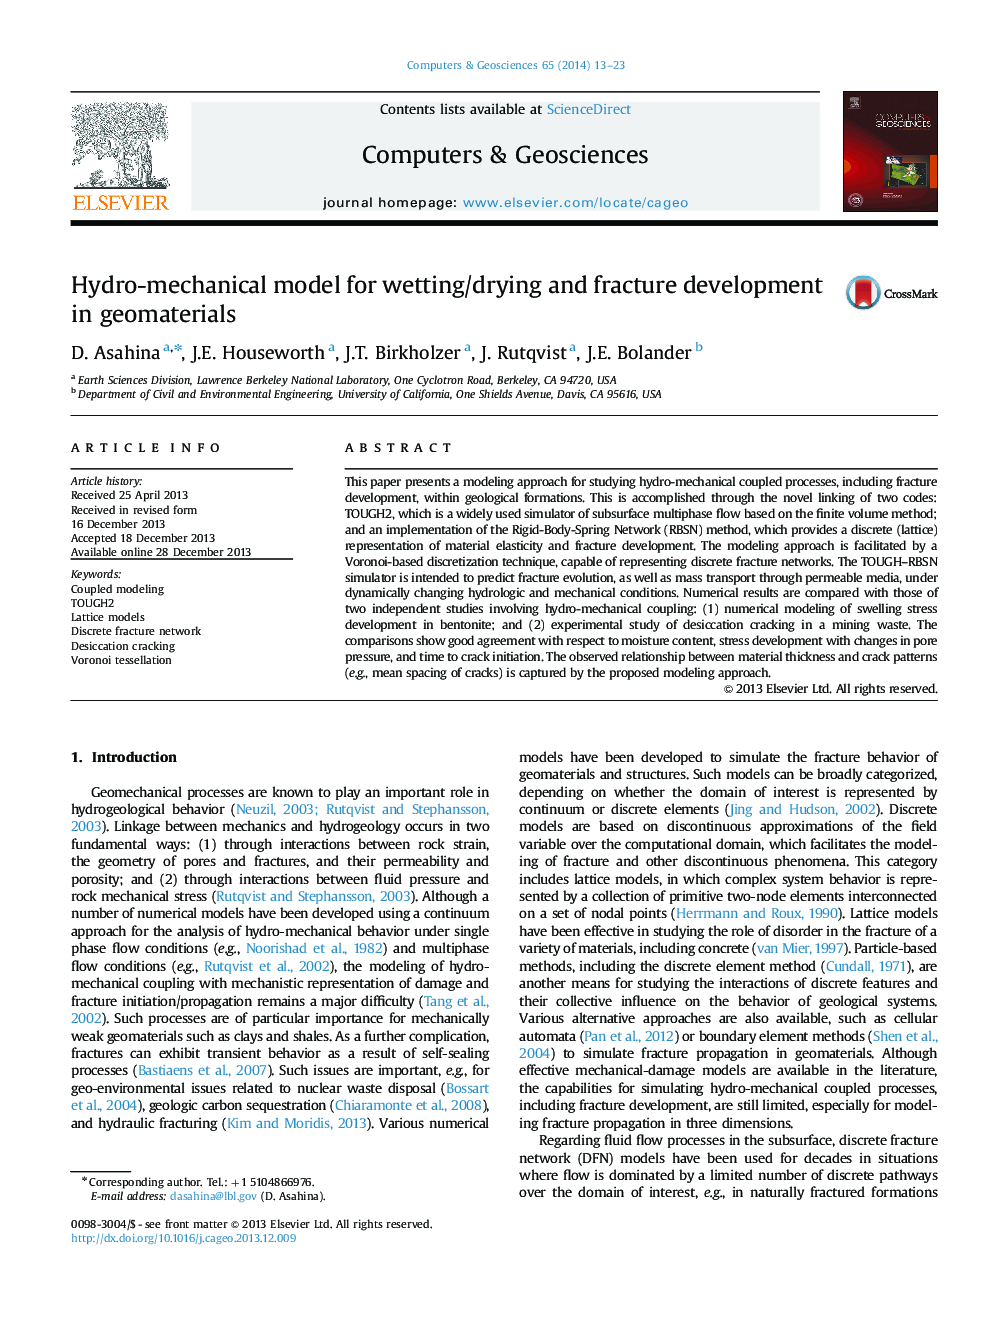 Hydro-mechanical model for wetting/drying and fracture development in geomaterials